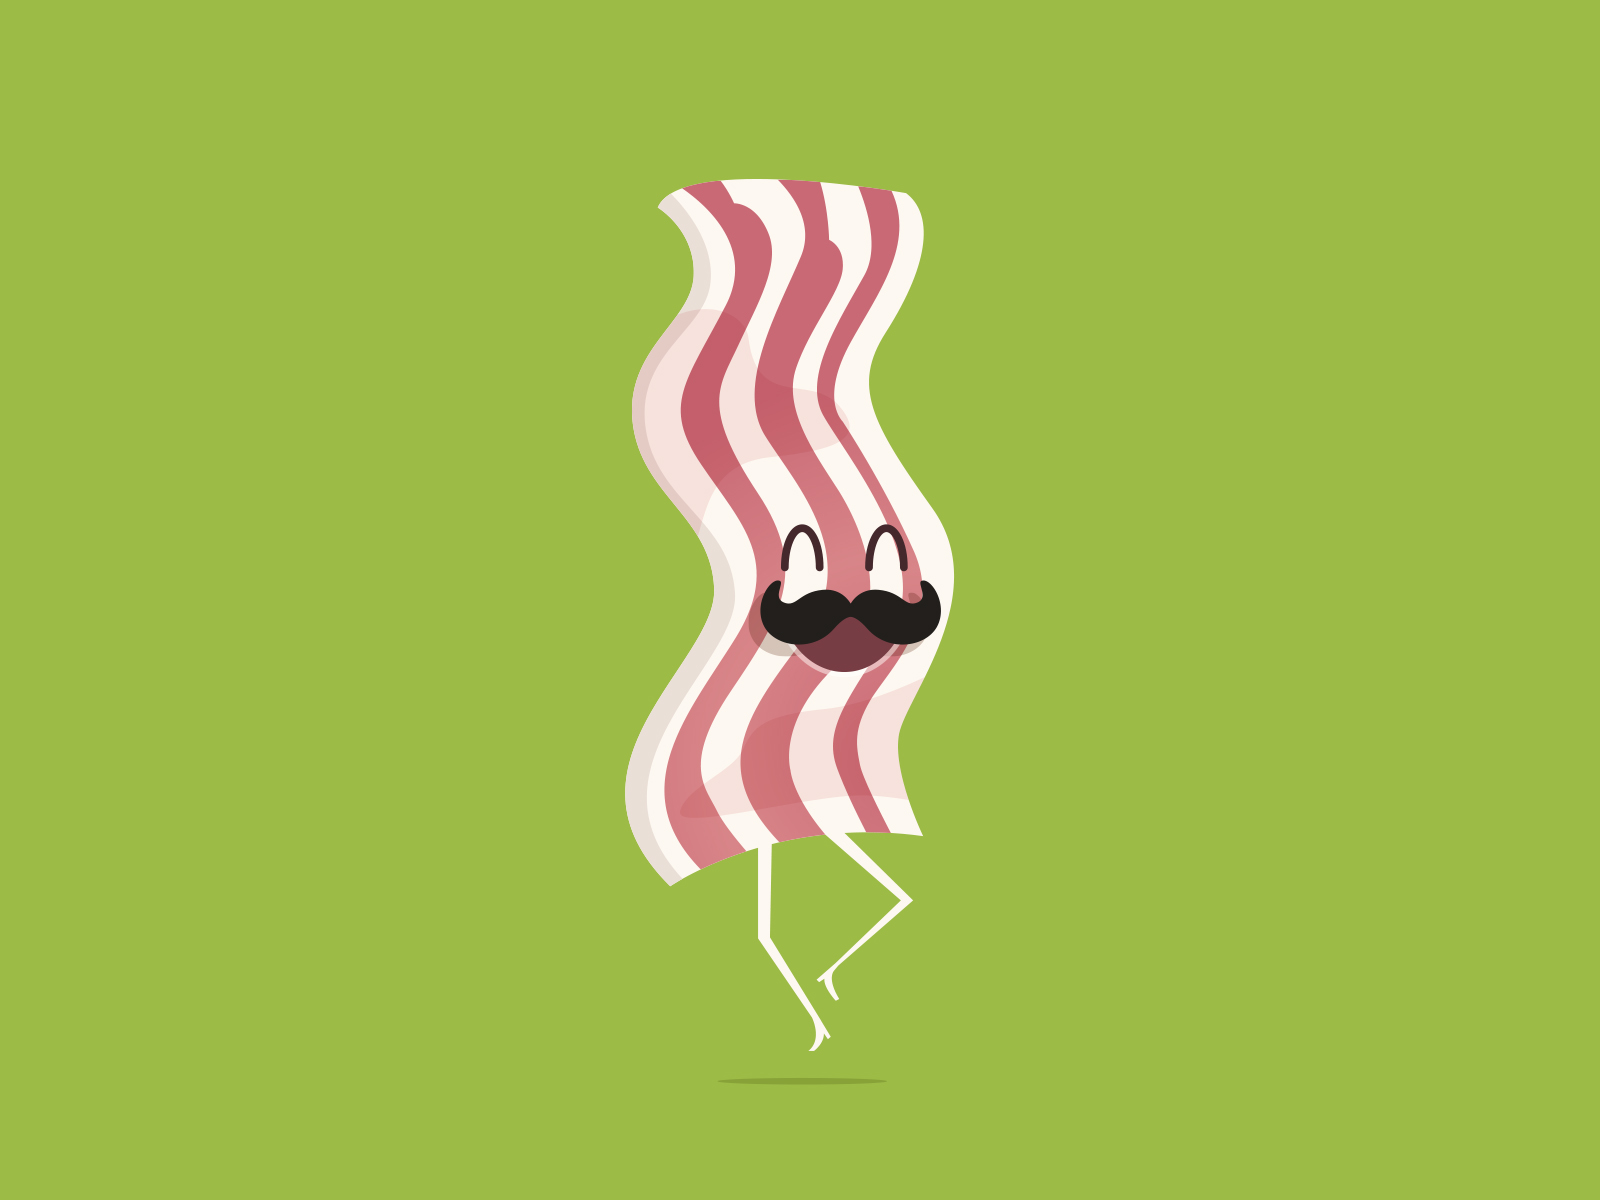 Bacon clipart flatworm. One year of design